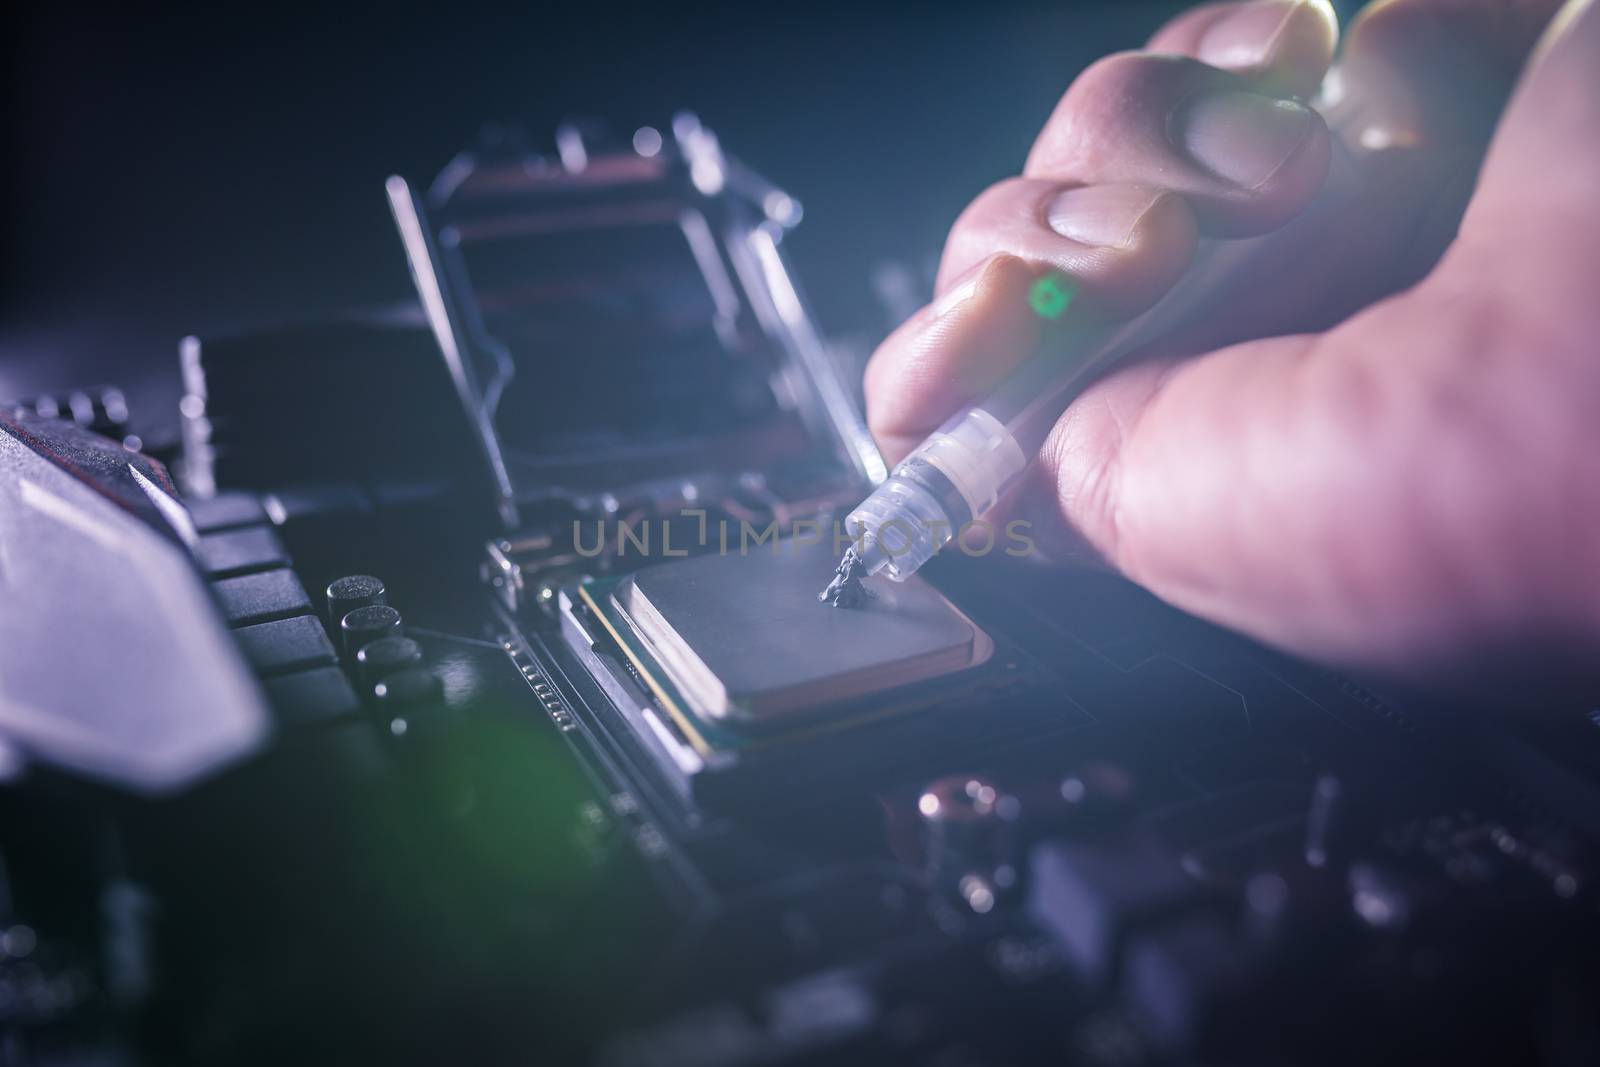 Close up to technician squeezing or application the thermal paste compound on the top of main cpu in the socket. Concept of repairing or upgrading computer hardware. by petrsvoboda91